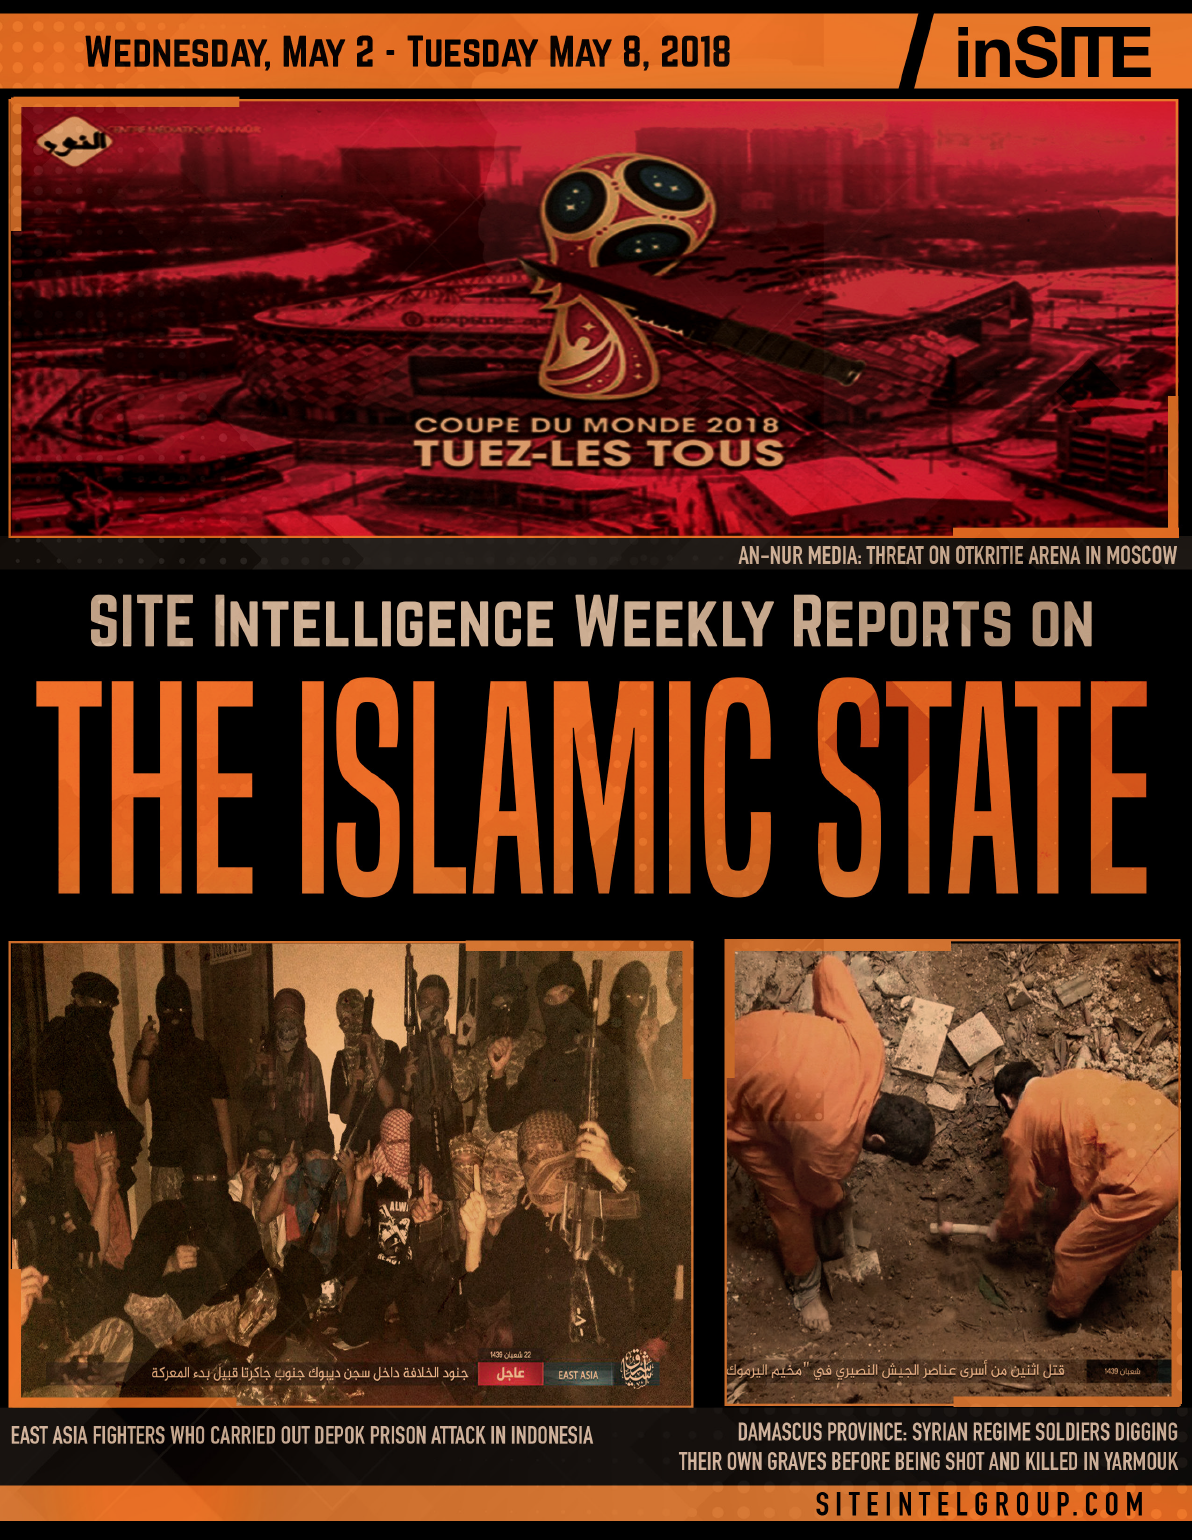 Weekly inSITE on the Islamic State for May 2-8, 2018